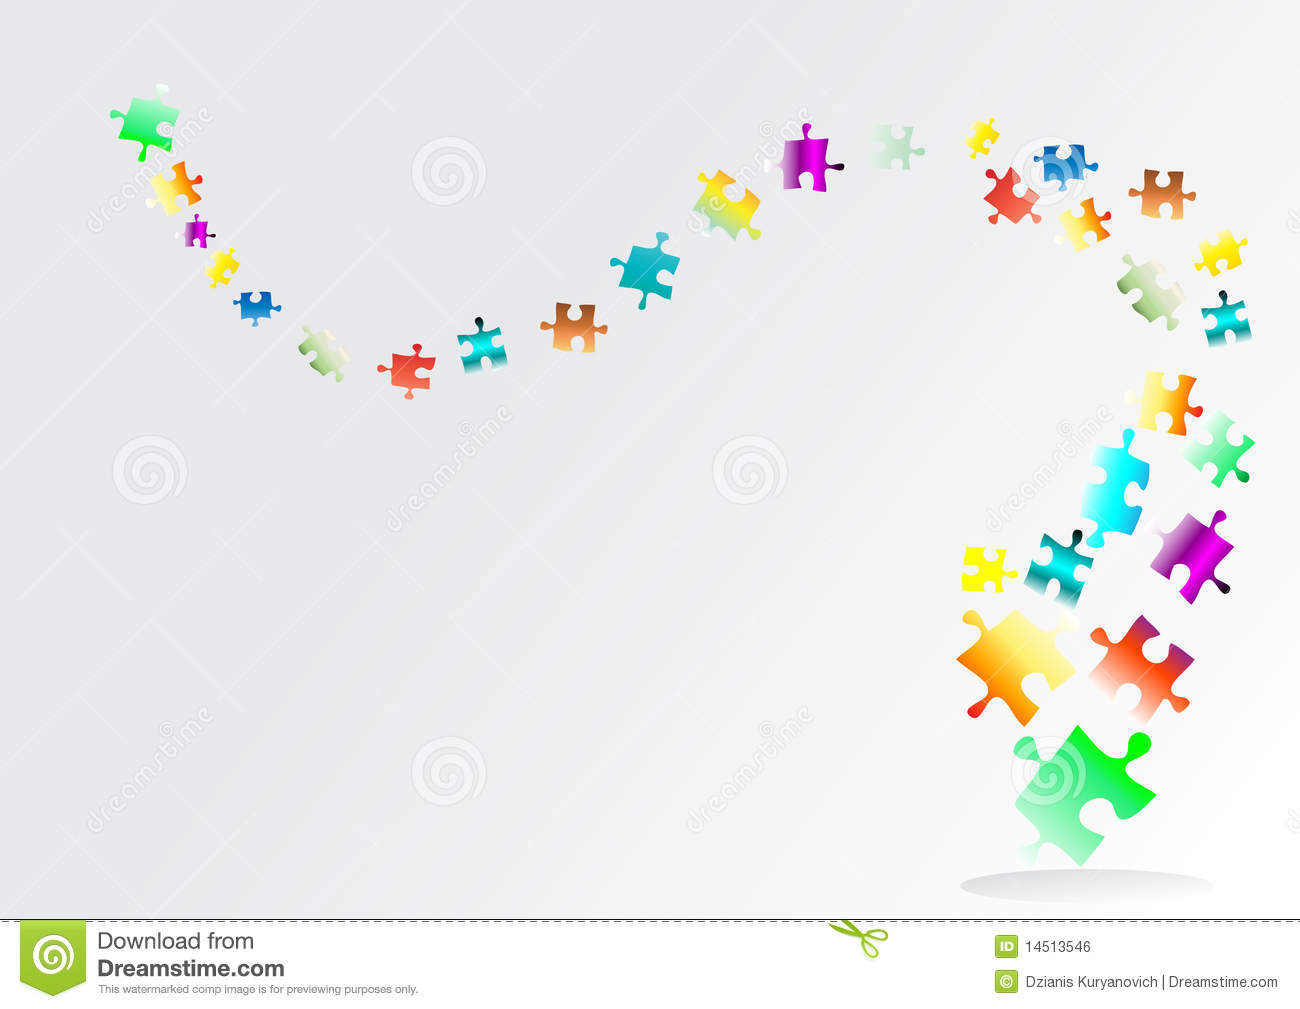 Royalty Free Stock Image  Abstract Rainbow Puzzle Background